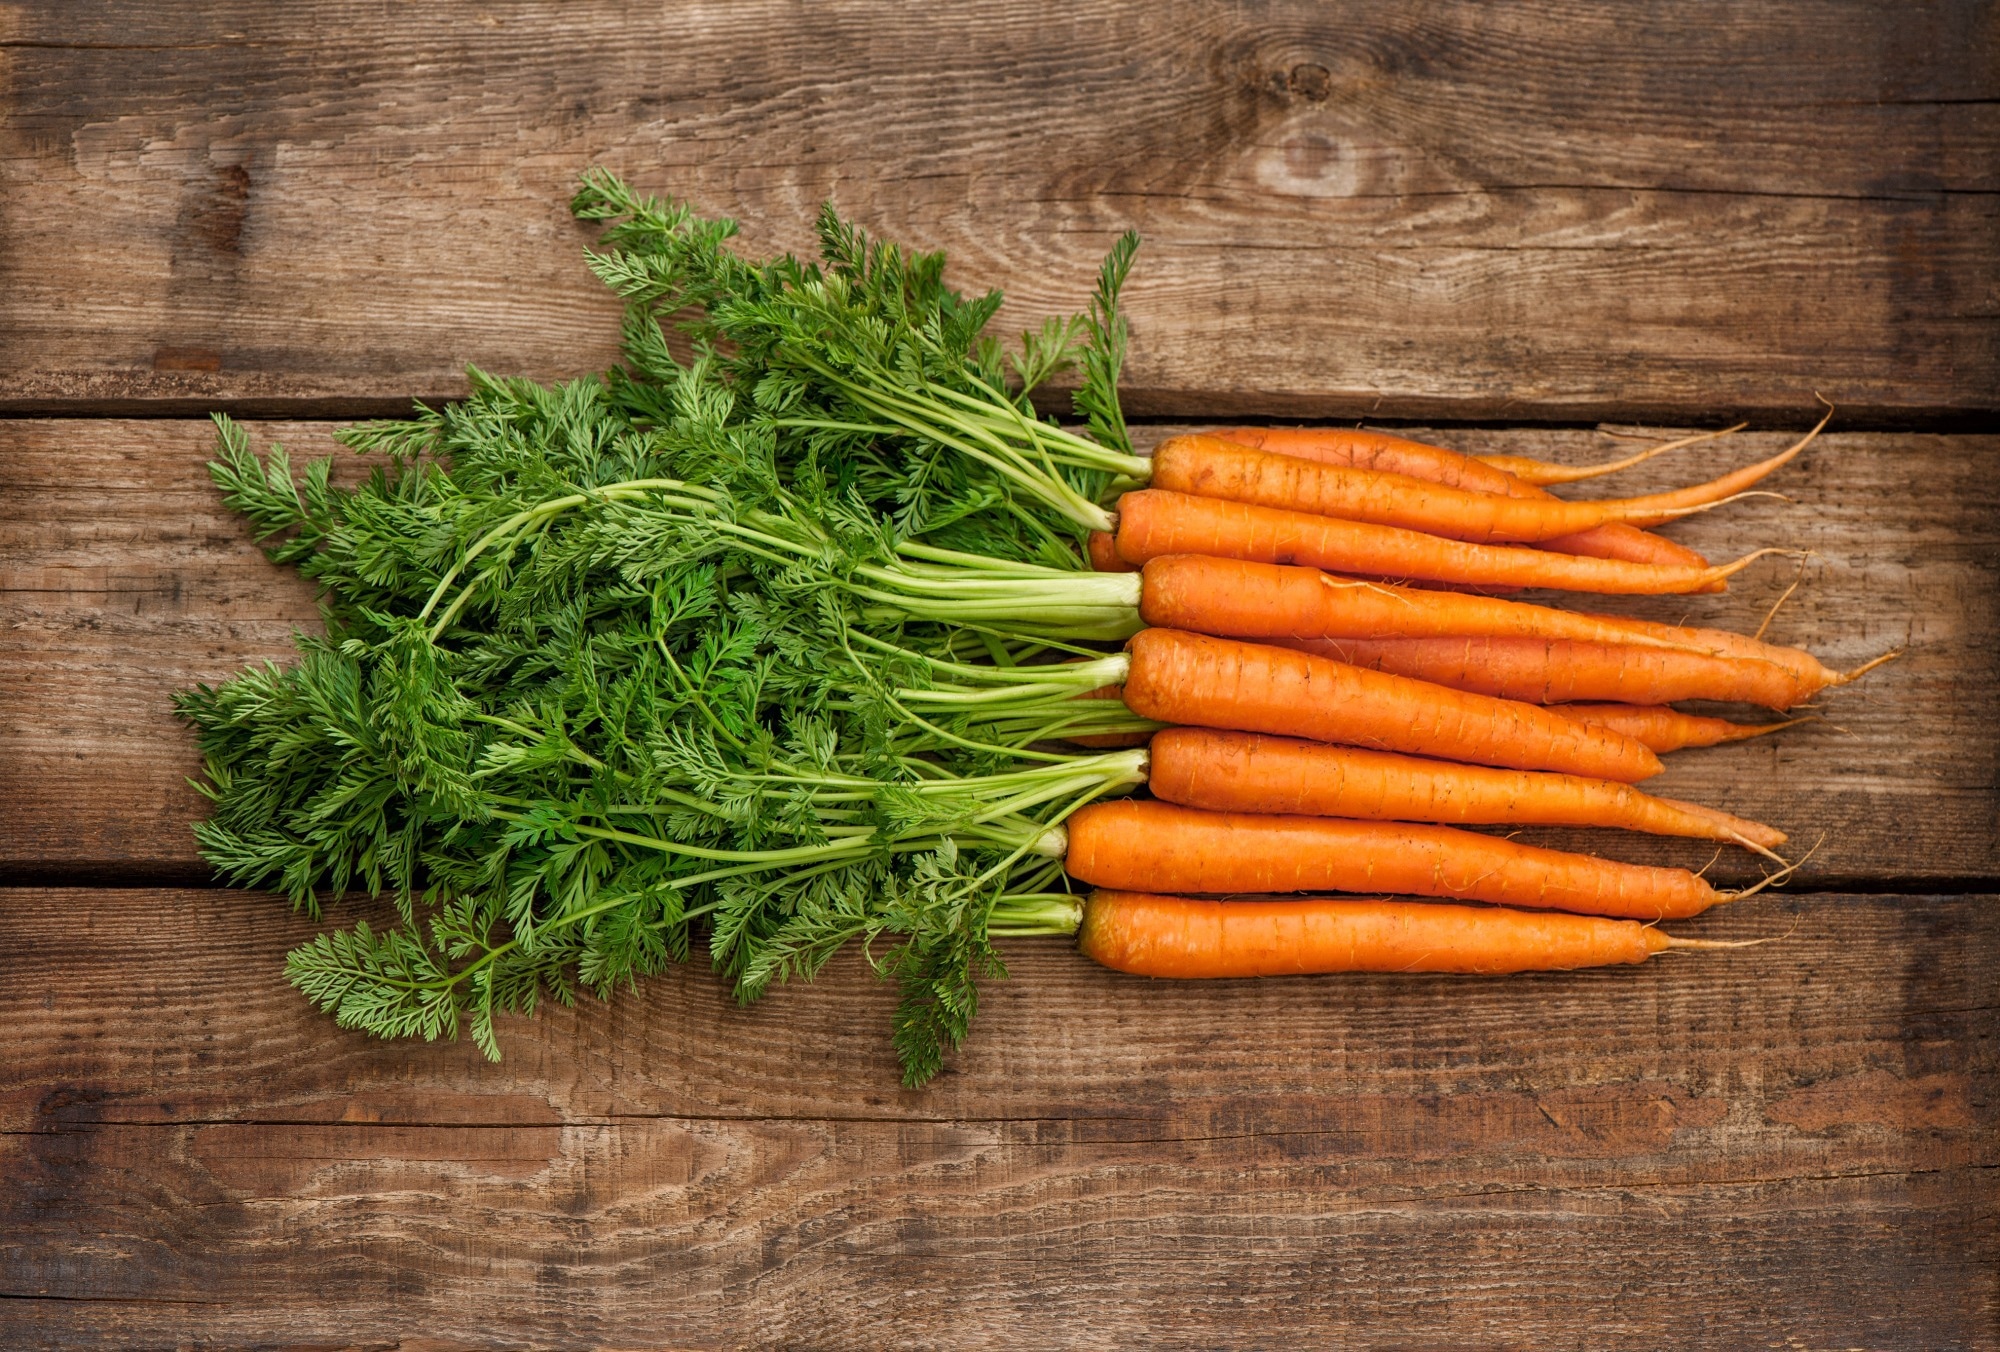 Study: Overview of the Potential Beneficial Effects of Carotenoids on Consumer Health and WellBeing. Image Credit: LilieGraphie / Shutterstock.com